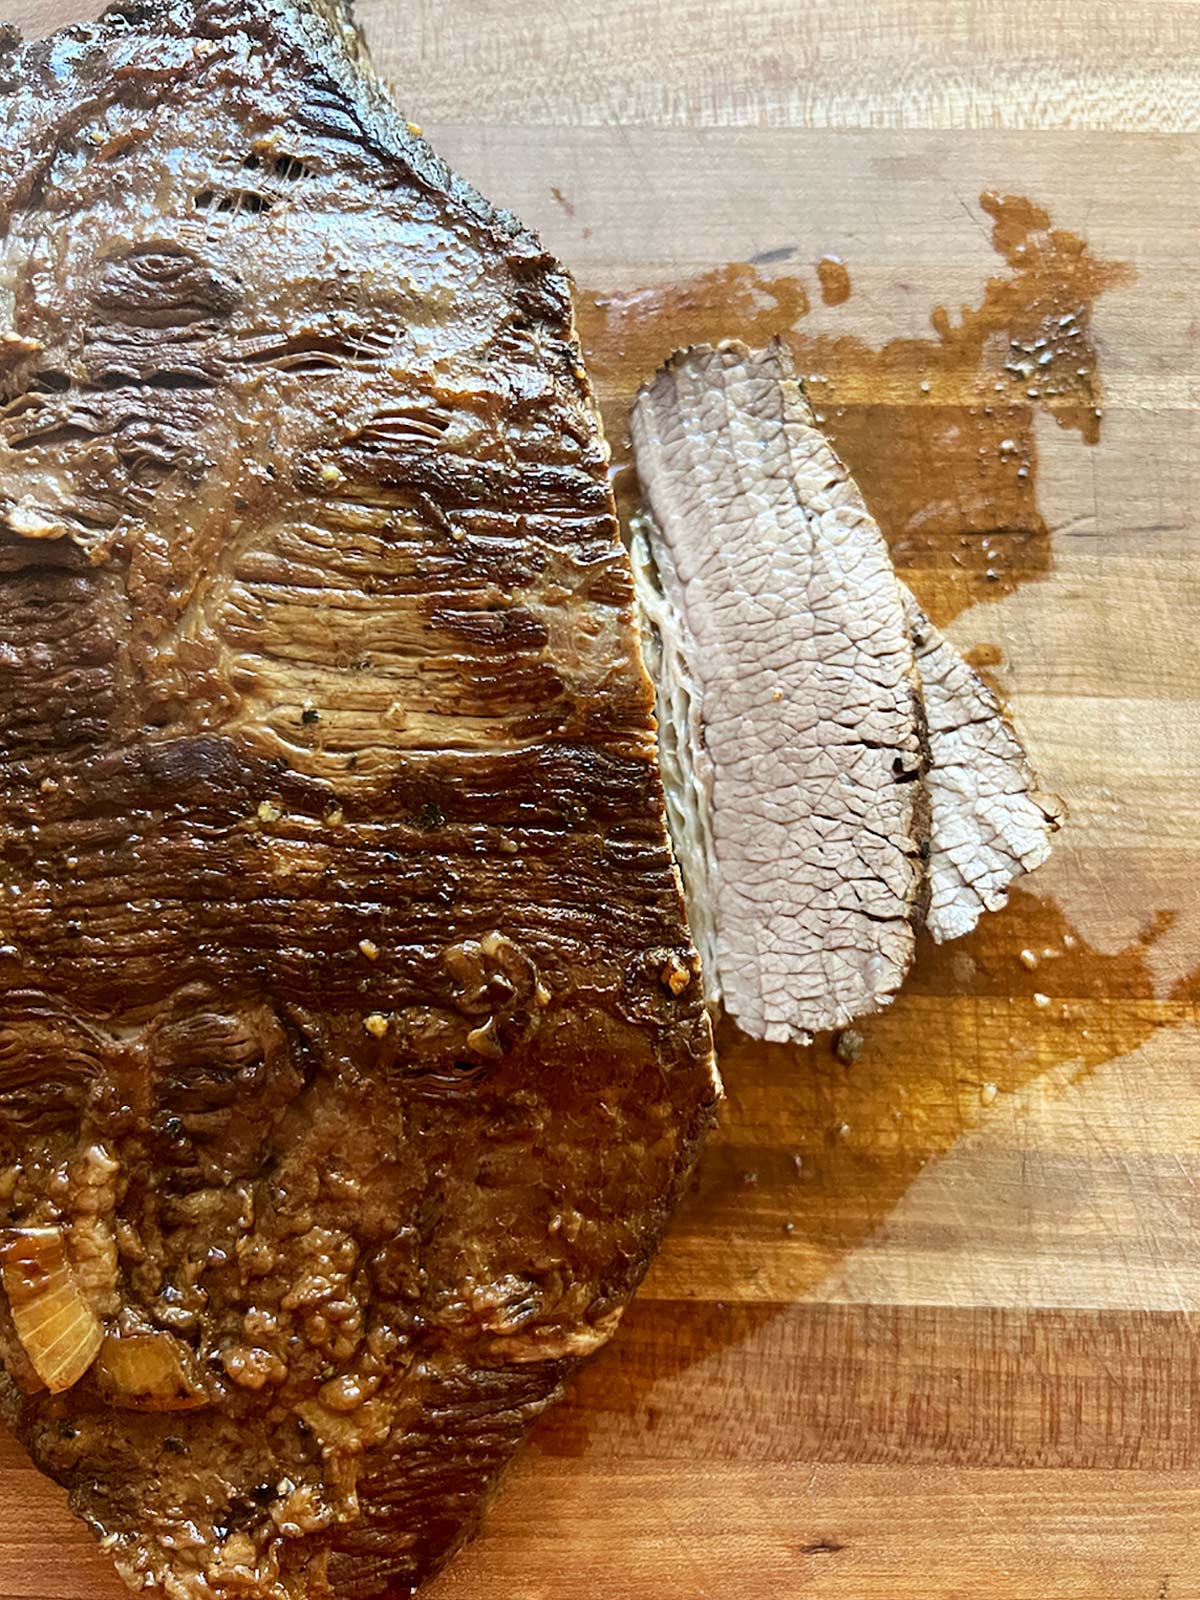 Brisket on a cutting board in the process of being sliced.